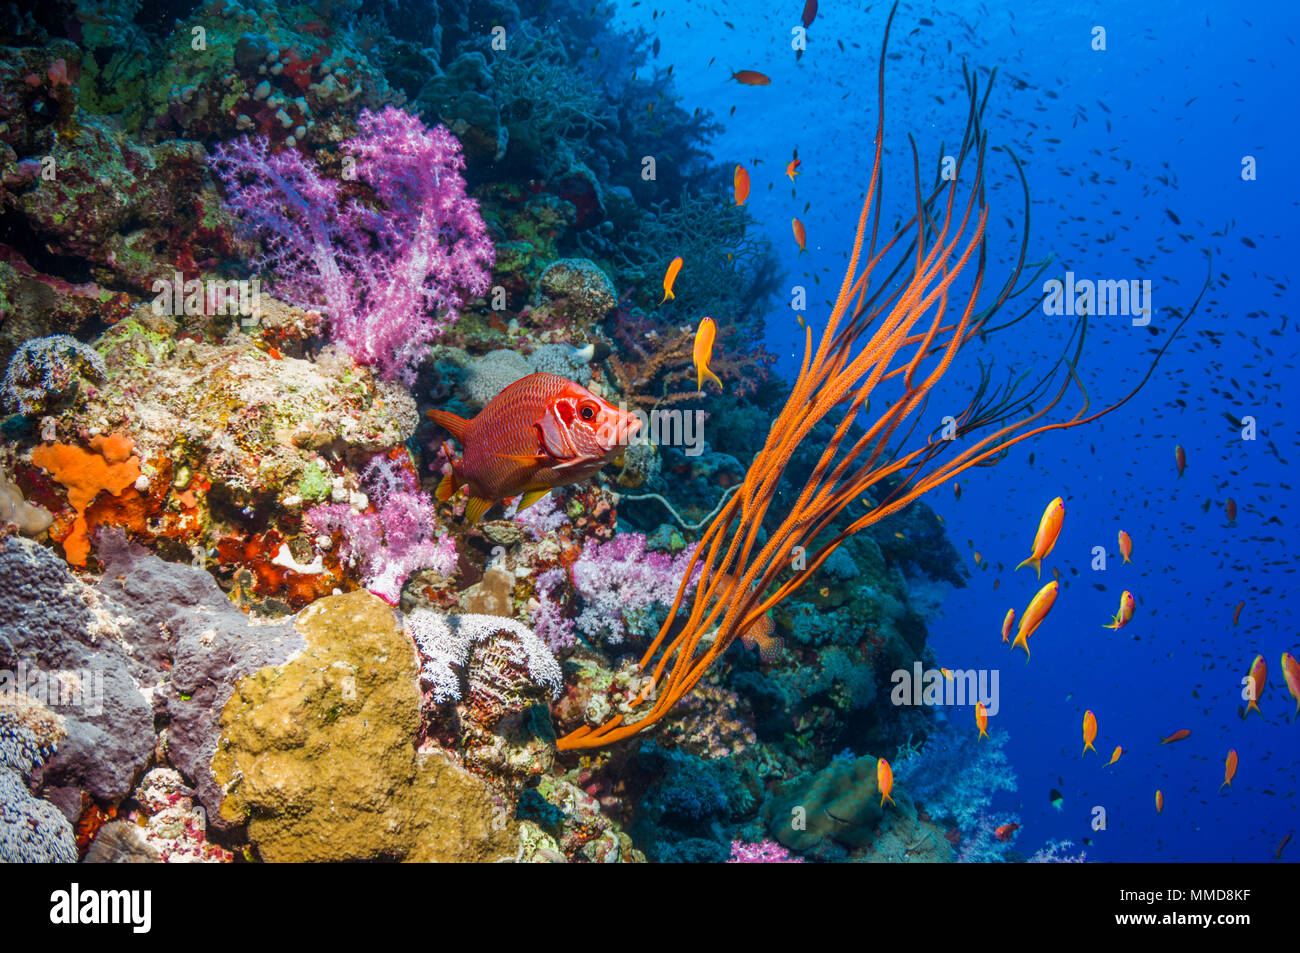 Long-jawed squirrelfish [Sargocentron spiniferum] with a Sea whip or Gorgonian [Ellisella ceratophyta].  Egypt, Red Sea. Stock Photo